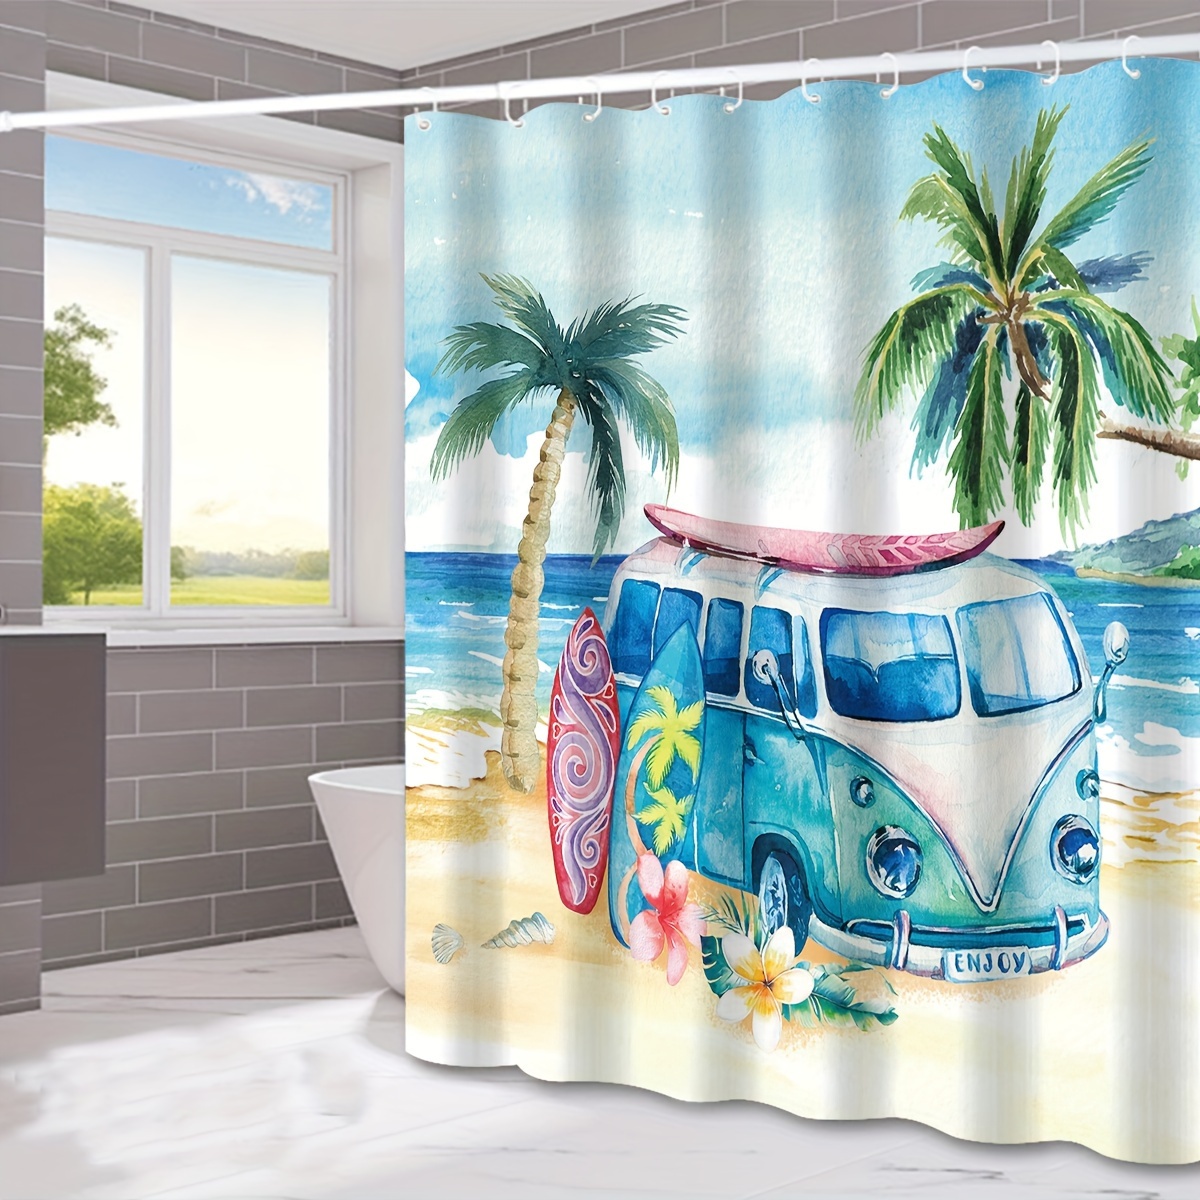 

1pc Beach Surfboard Bus Print, Waterproof With Hooks, Bathroom Partition Hanging Curtain, Bathroom Accessories, Home Decor